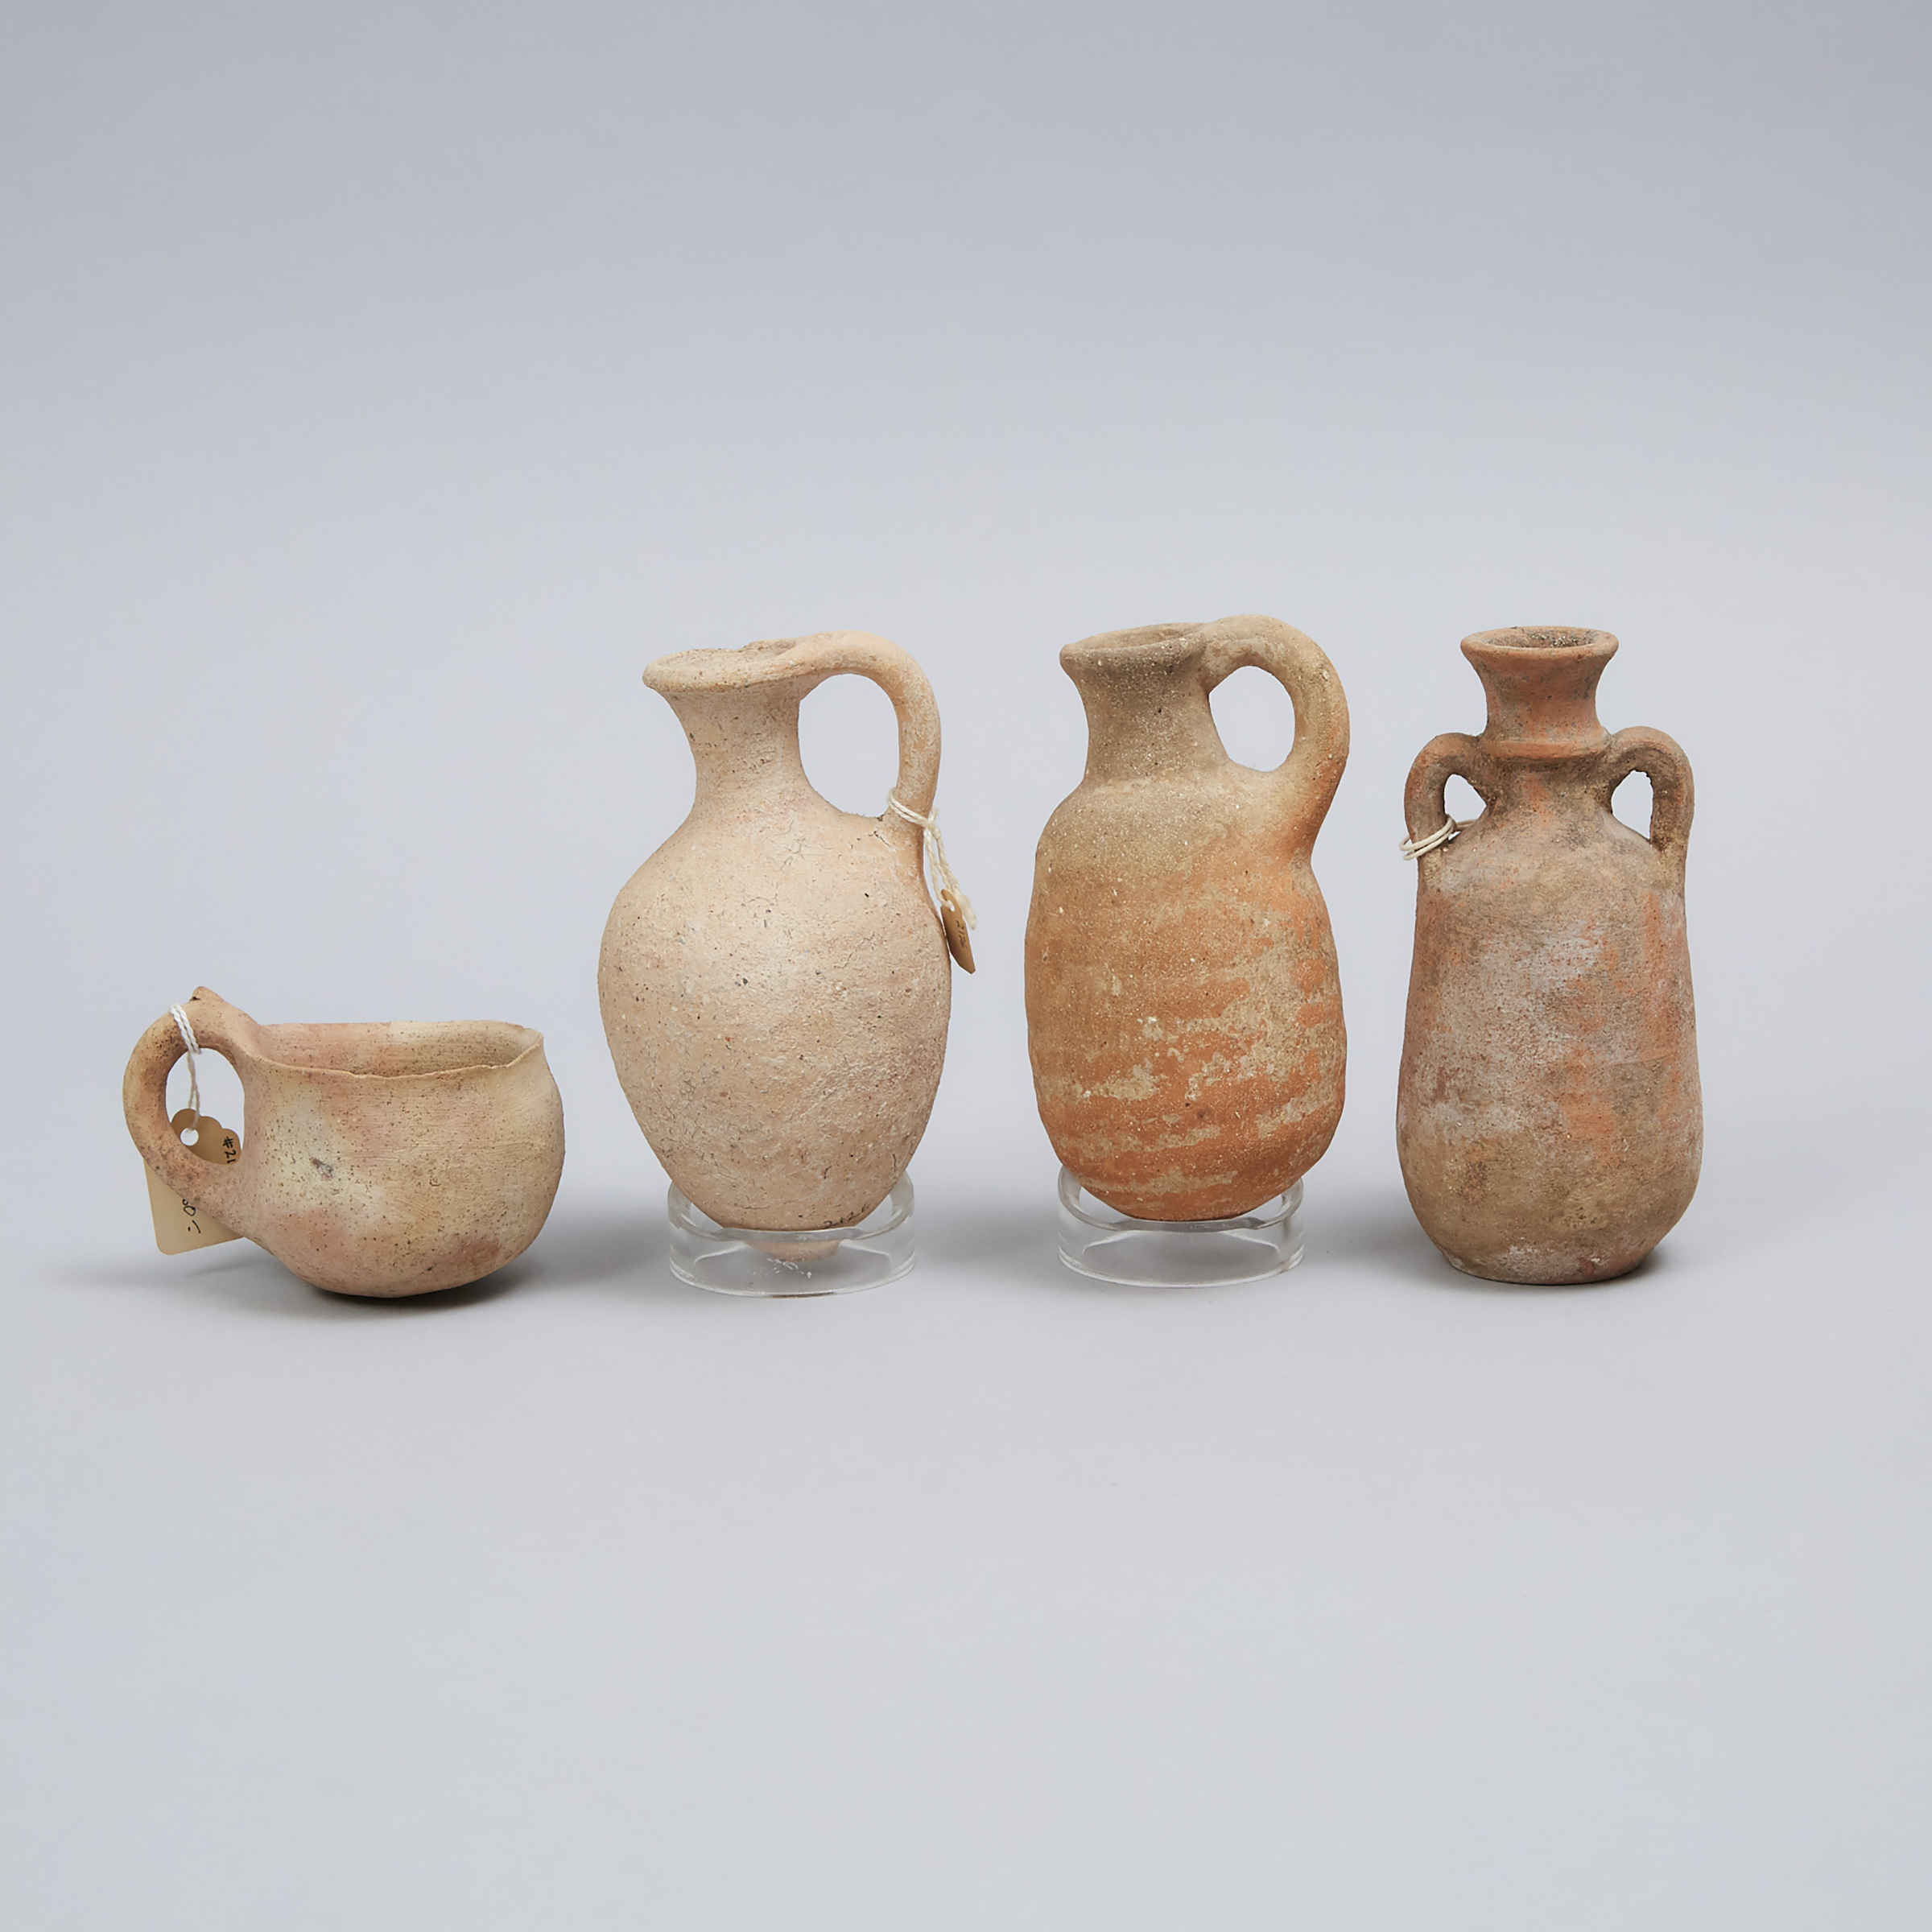 Four Pieces Levantine-Holy Land Pottery, Iron Age to Roman Period, 800 B.C.-100 A.D.